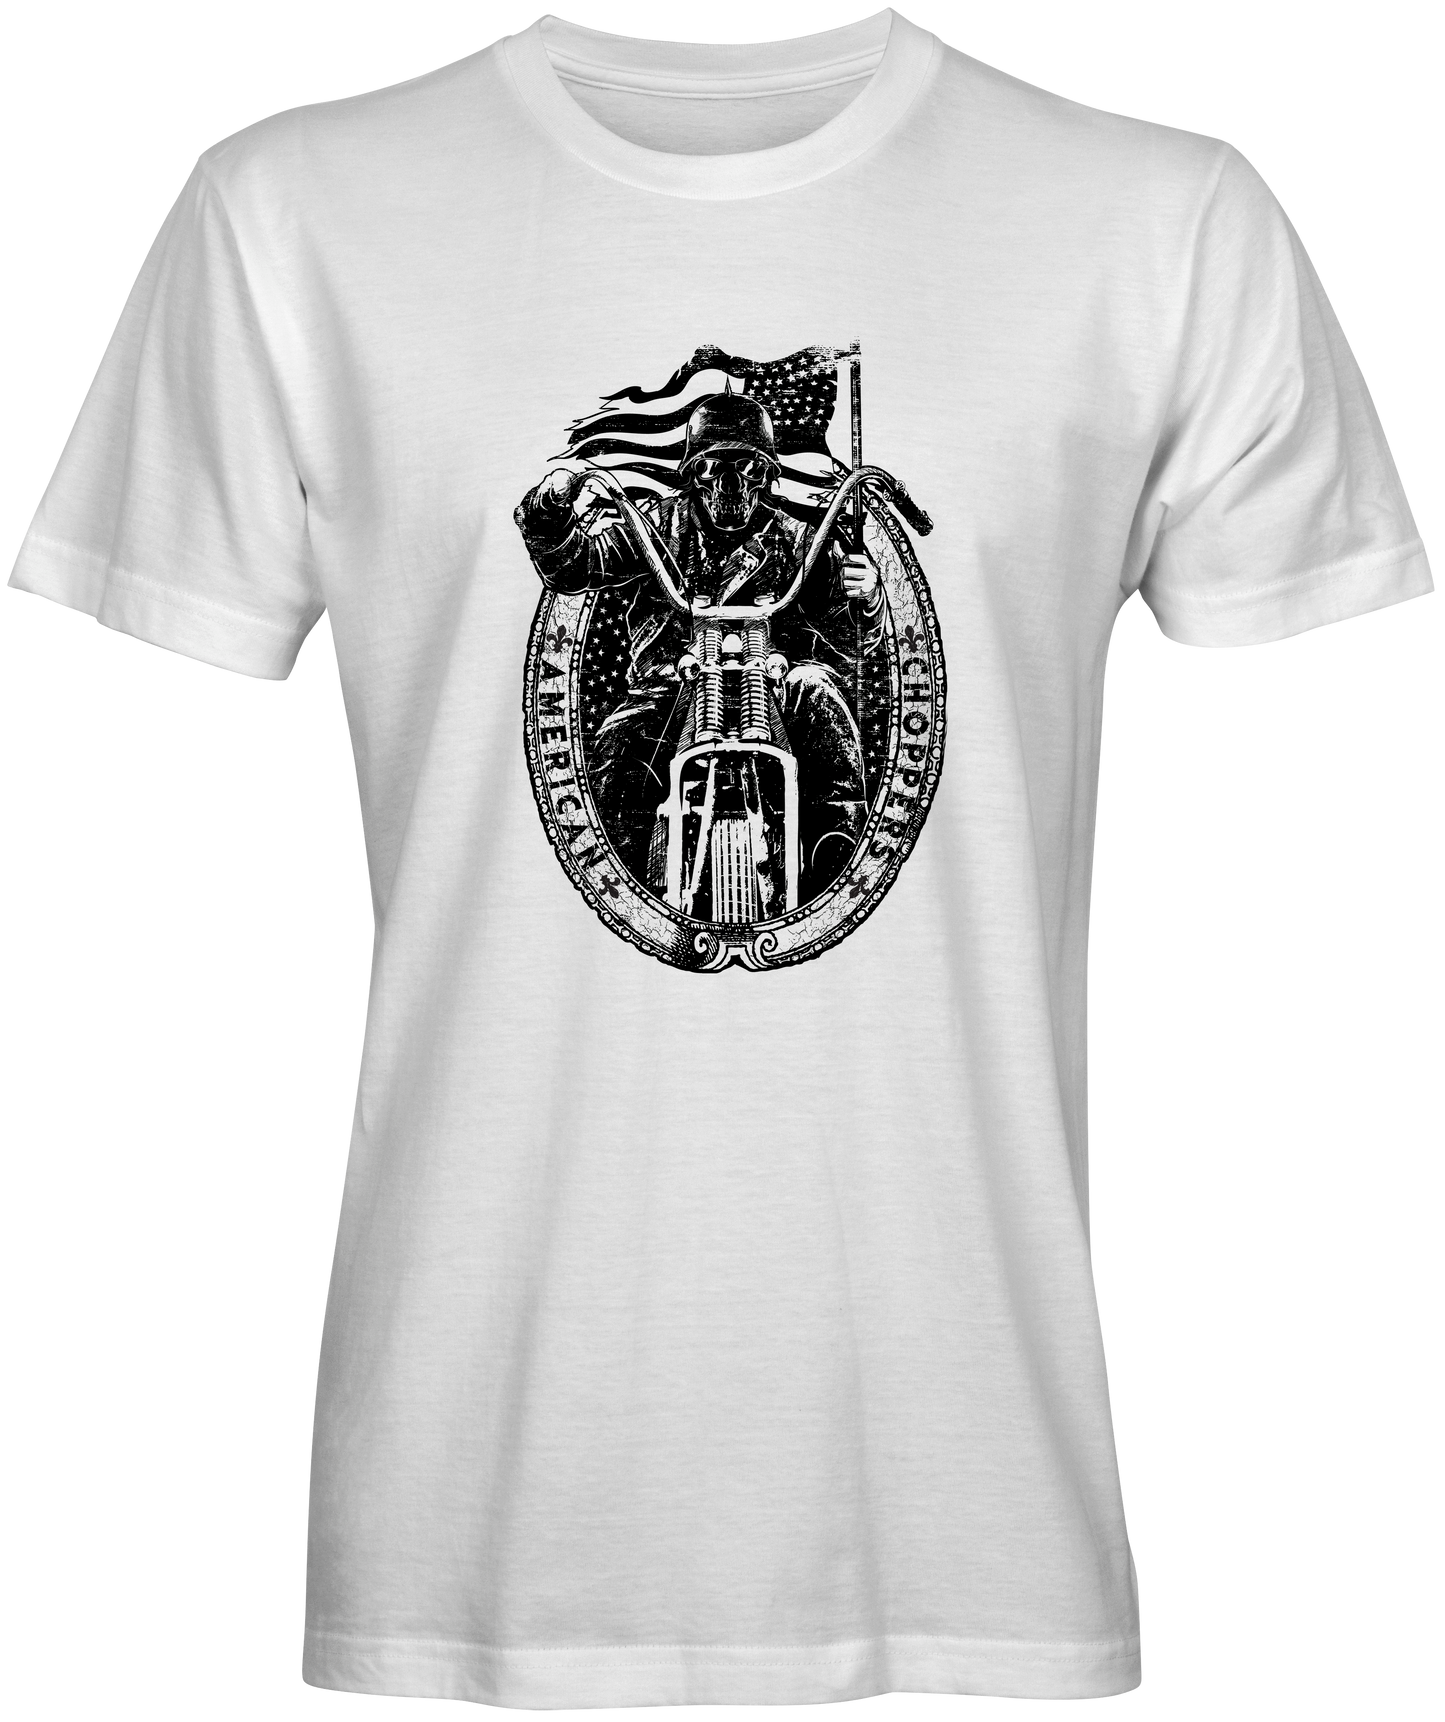 American Choppers Graphic Tee